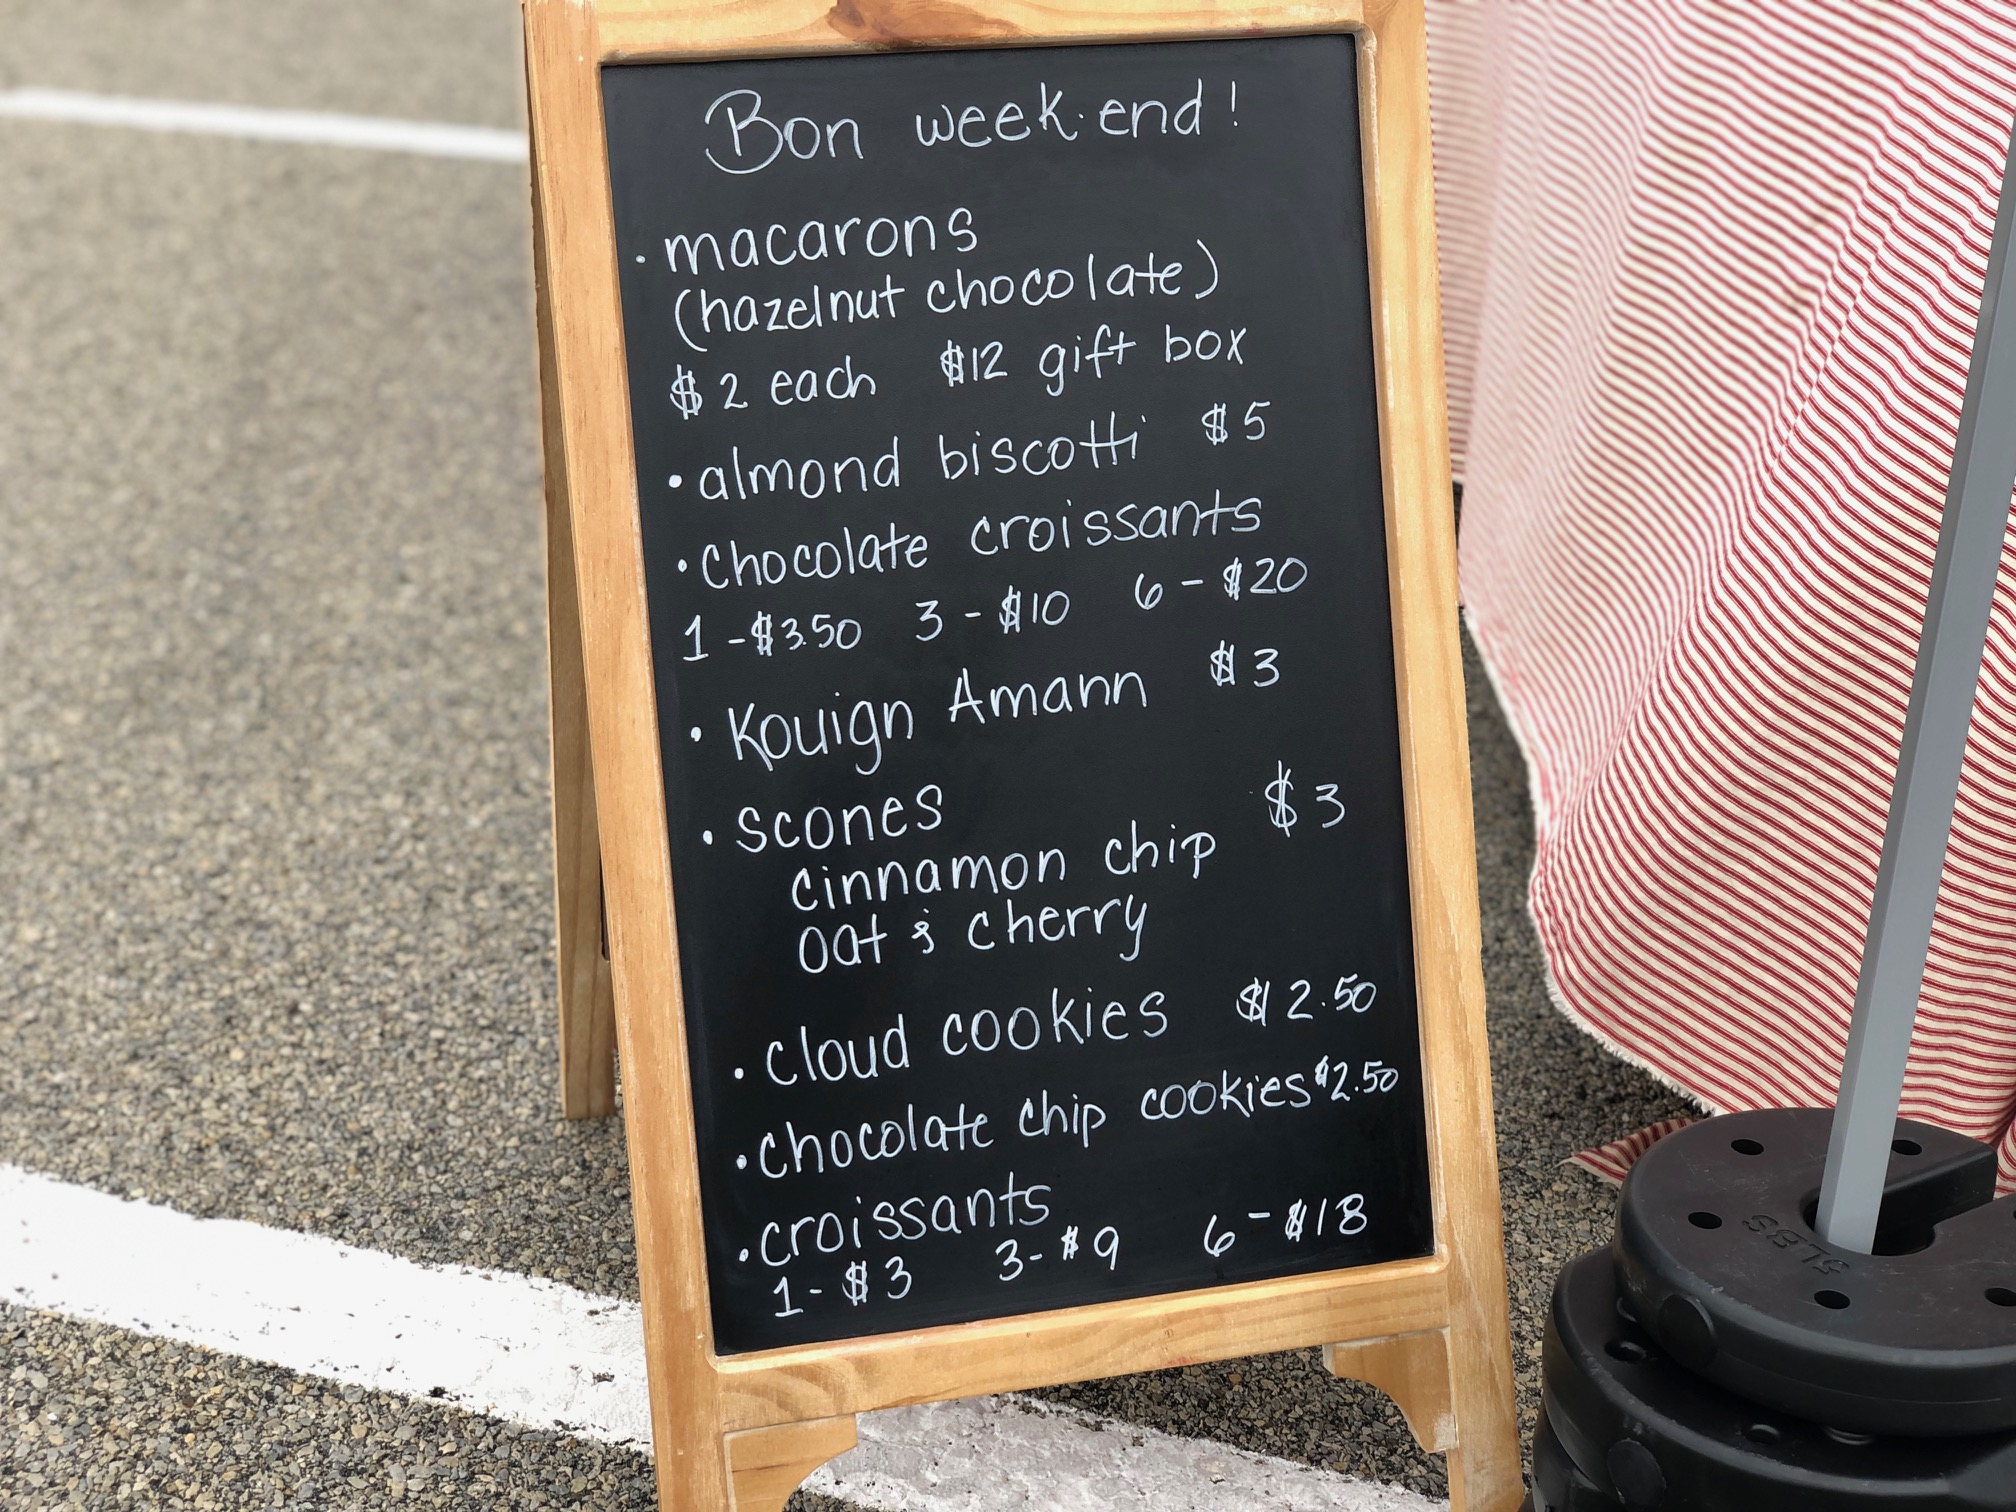 In the parking lot at the Urbana Market at the Square, there is a chalkboard sign with the names of baked goods and prices written neatly with white chalk.  Photo by Alyssa Buckley.